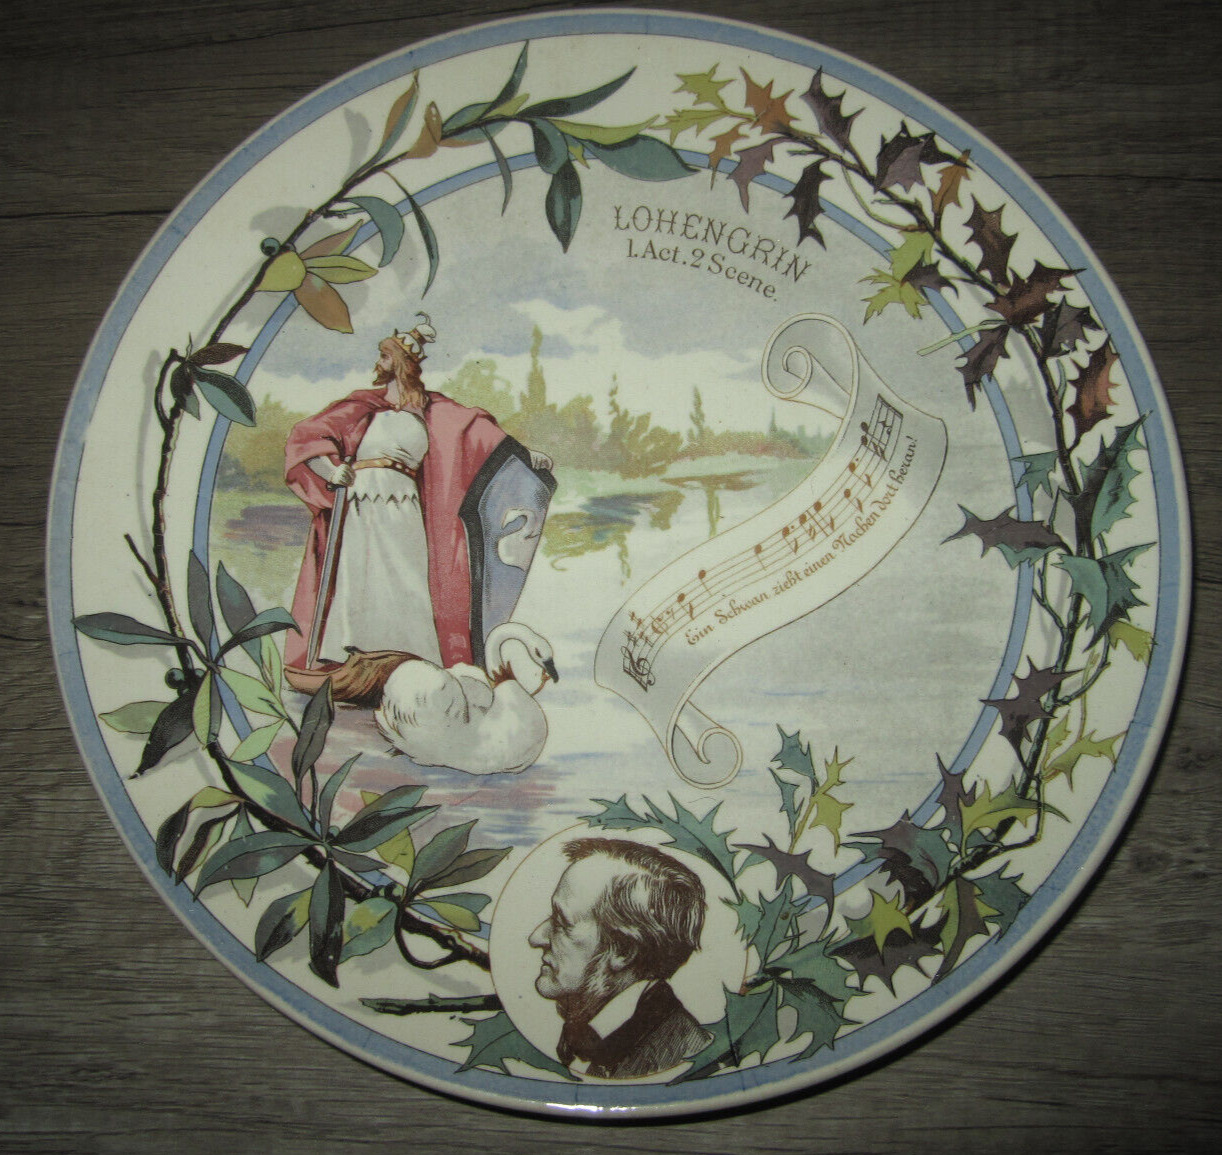 Antique French faience Sarreguemines plate, Lohengrin opera Richard Wagner